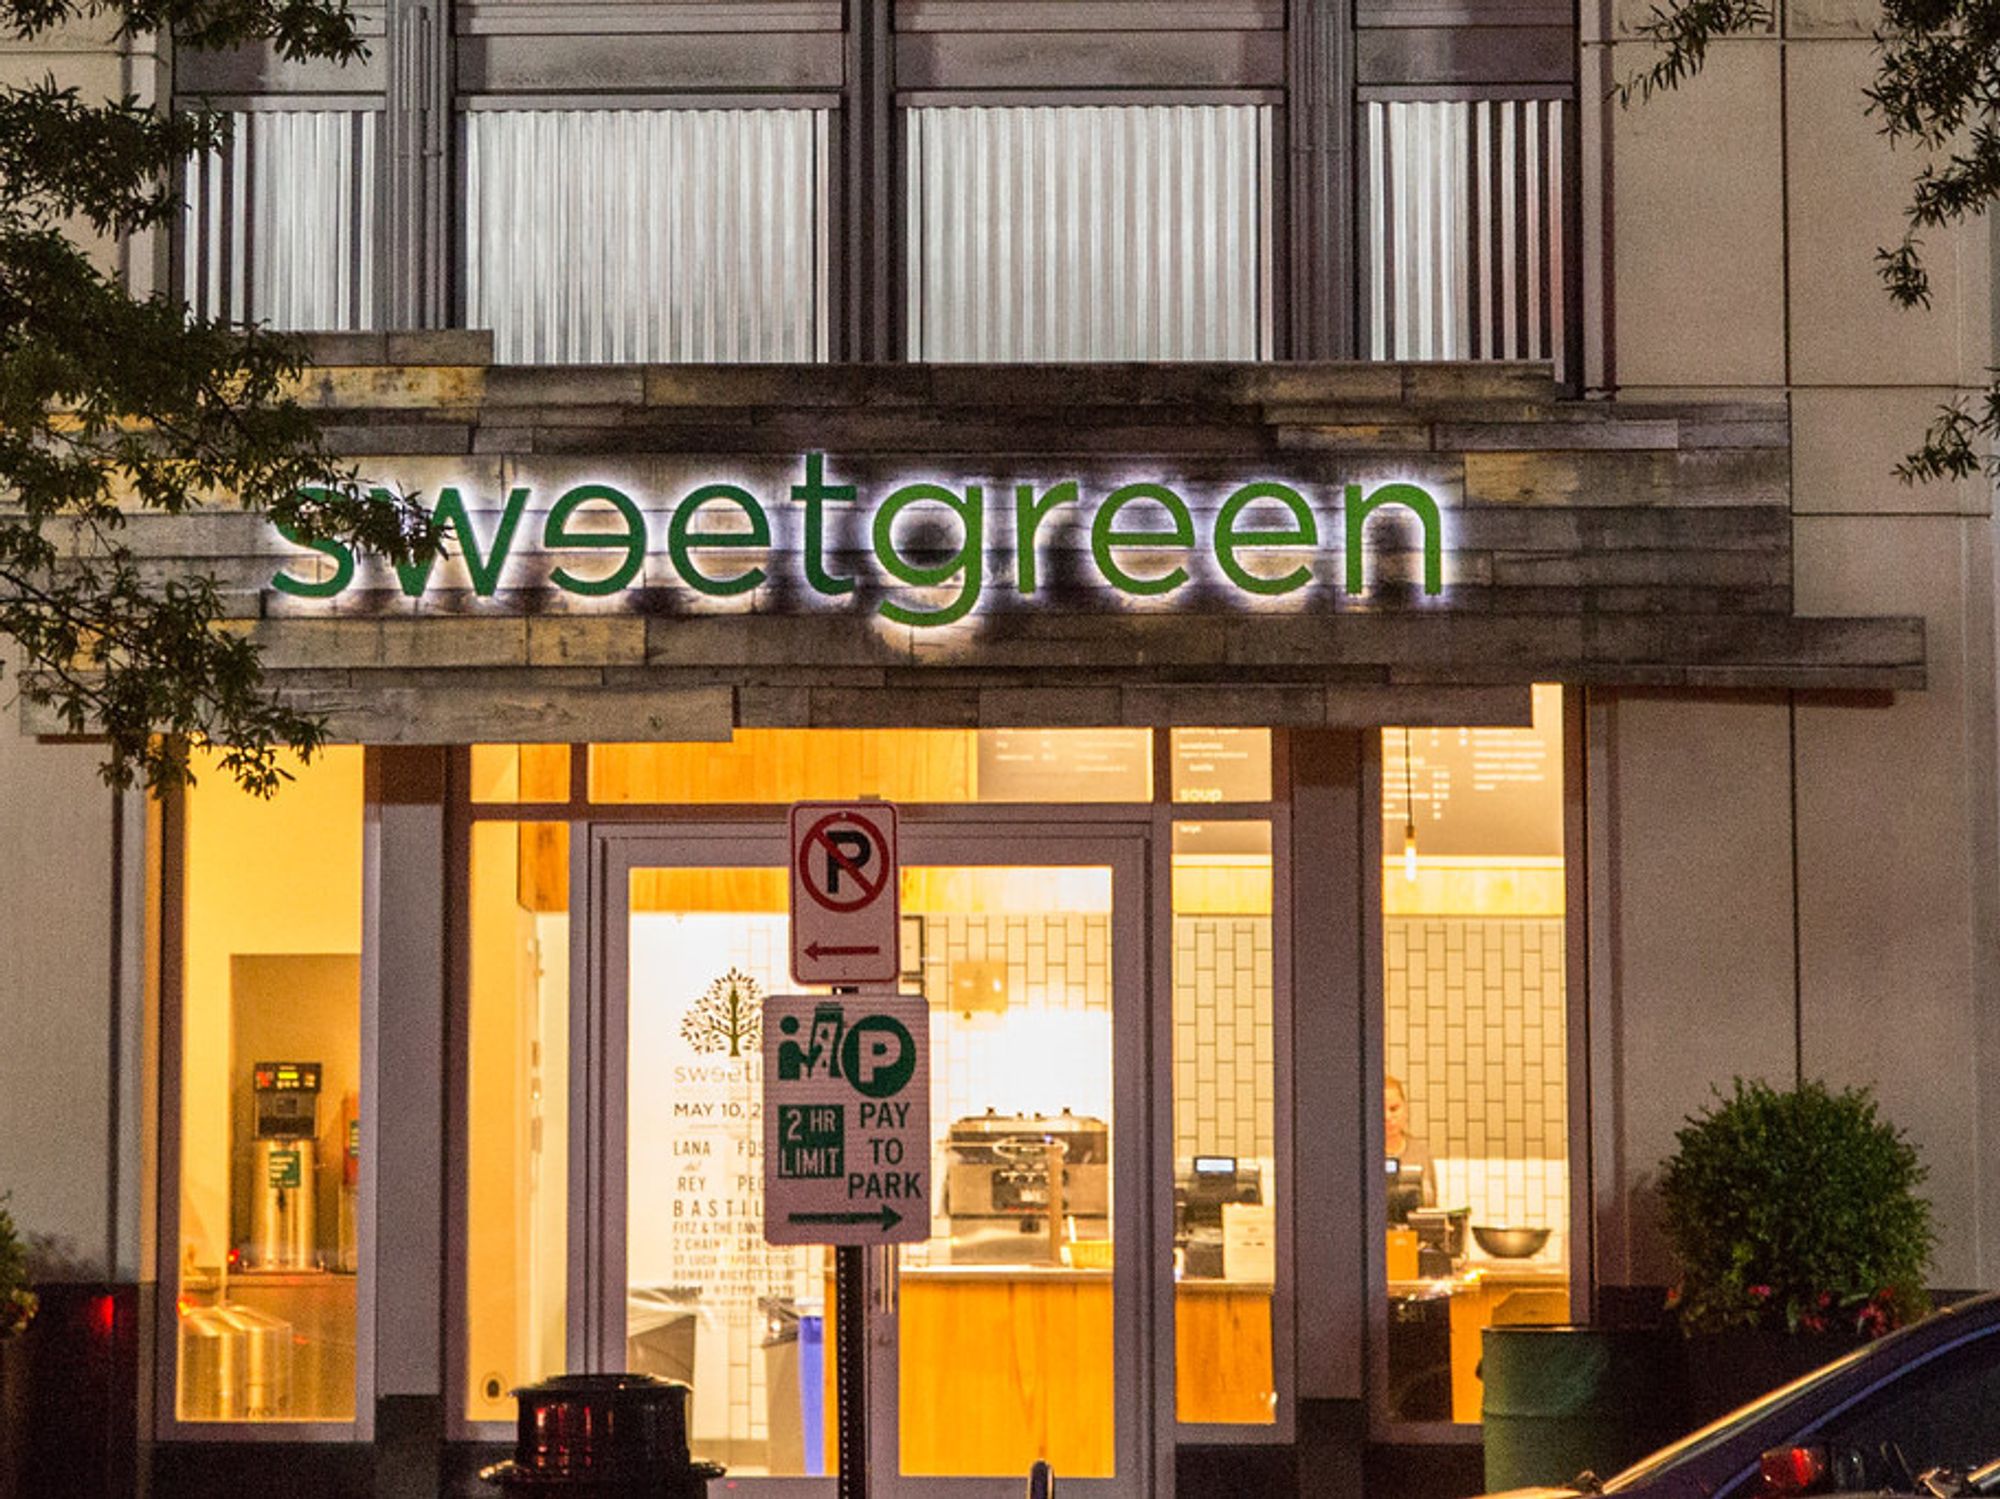 'Sweetgreen is Not a Tech Company': The Company's CEO on How He's Adapting to the Pandemic